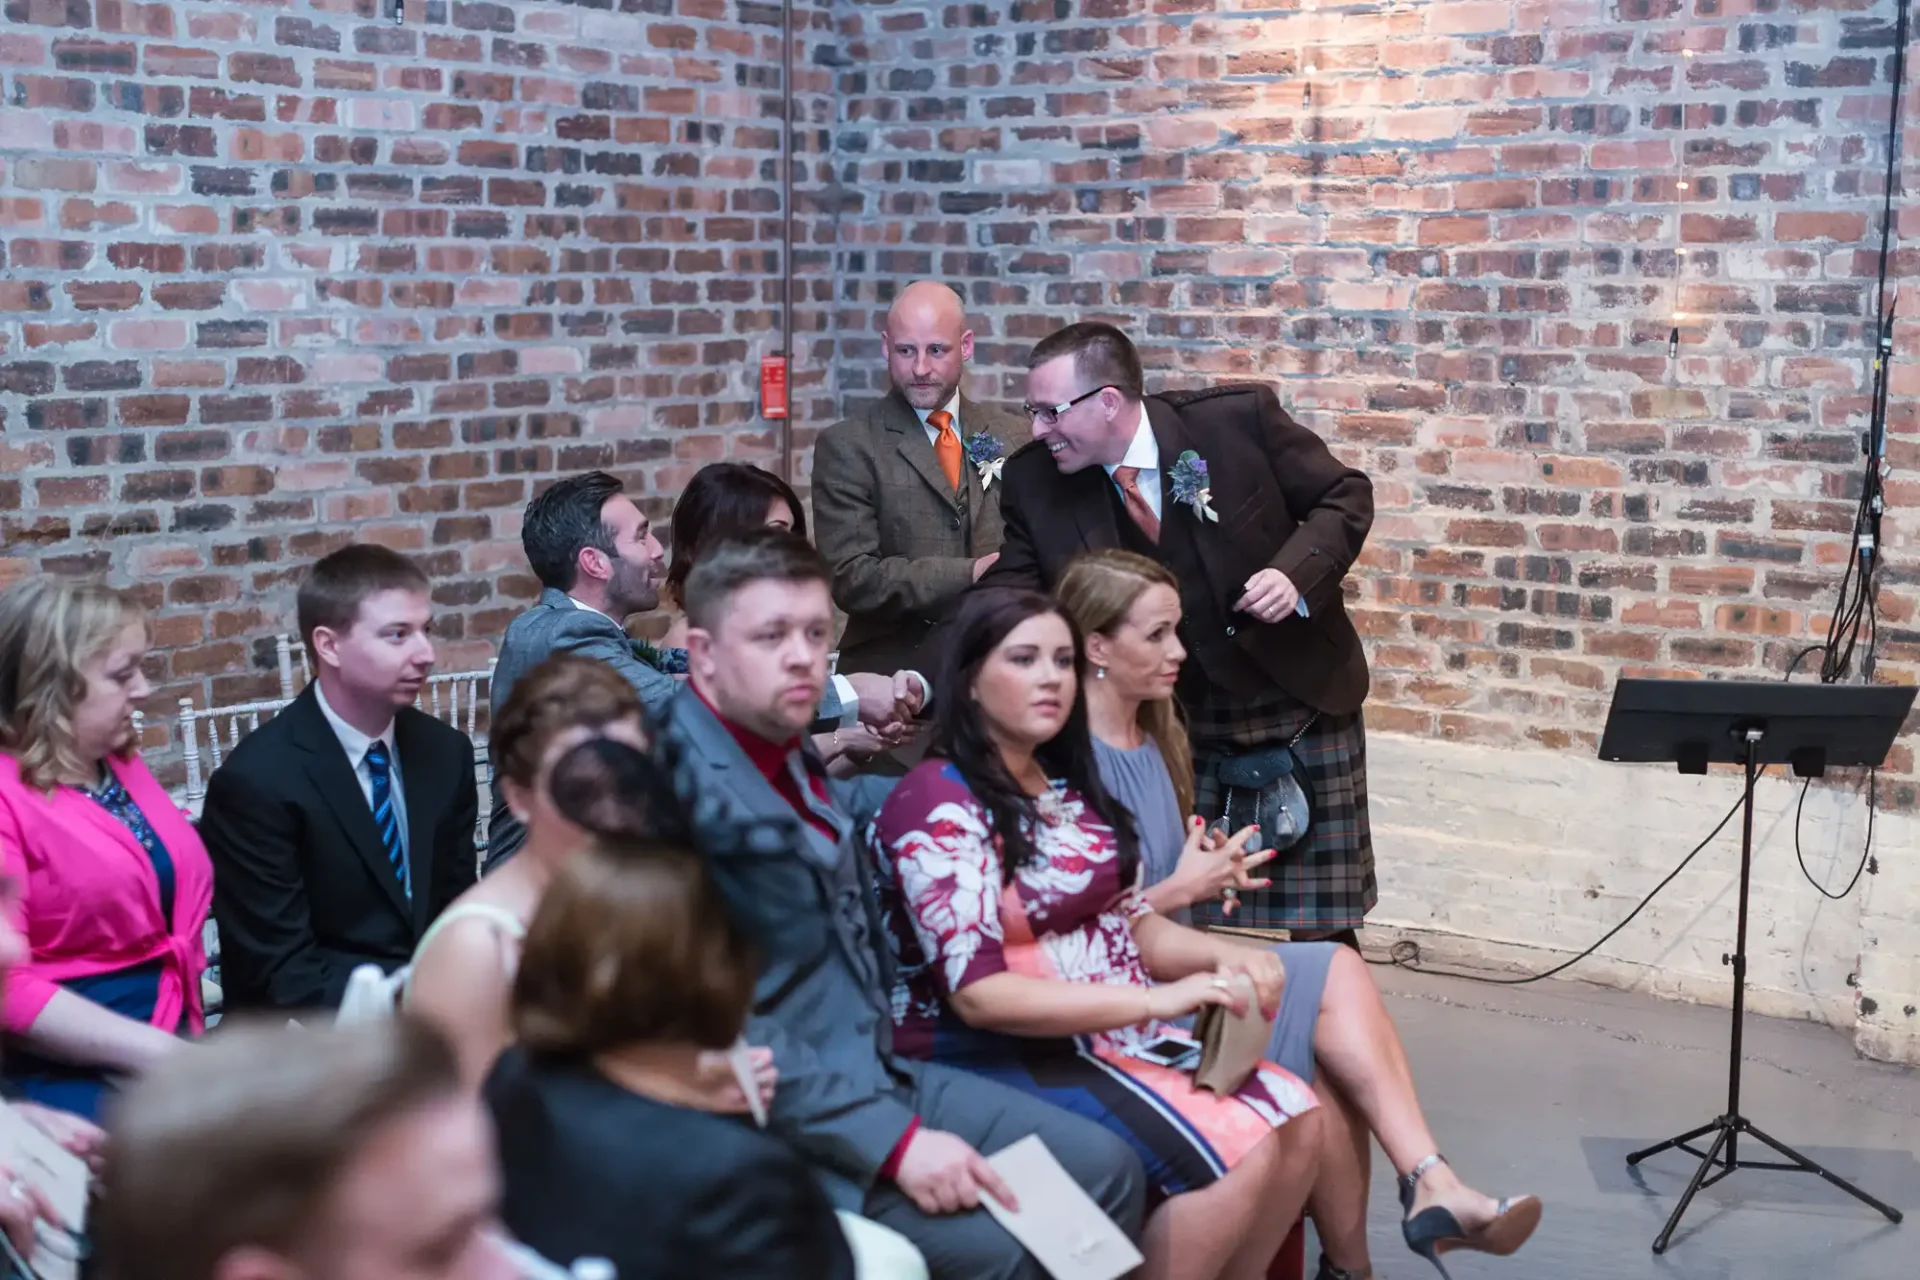 A group of people sitting on chairs in a room with brick walls, attentively watching a speaker not visible in the image.